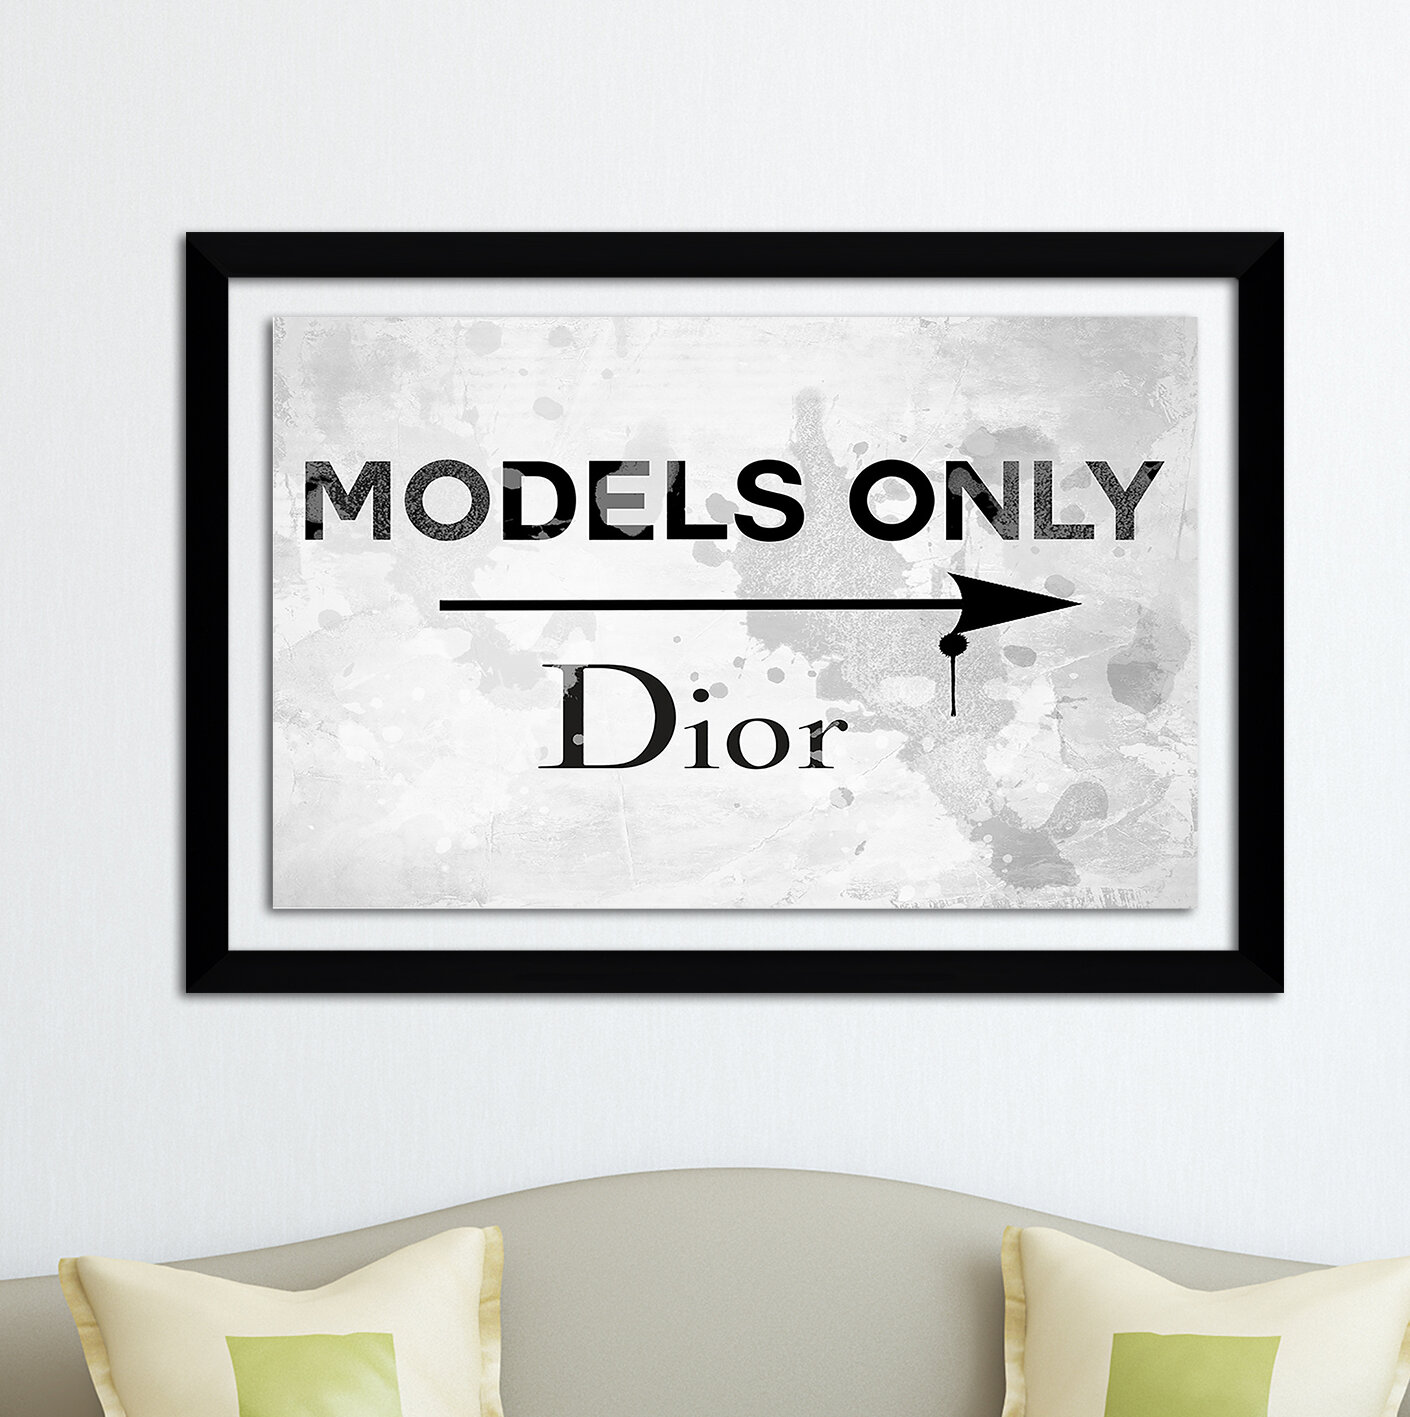 PicturePerfectInternational Models Only Dior Framed On Plastic/Acrylic by  BY Jodi Textual Art